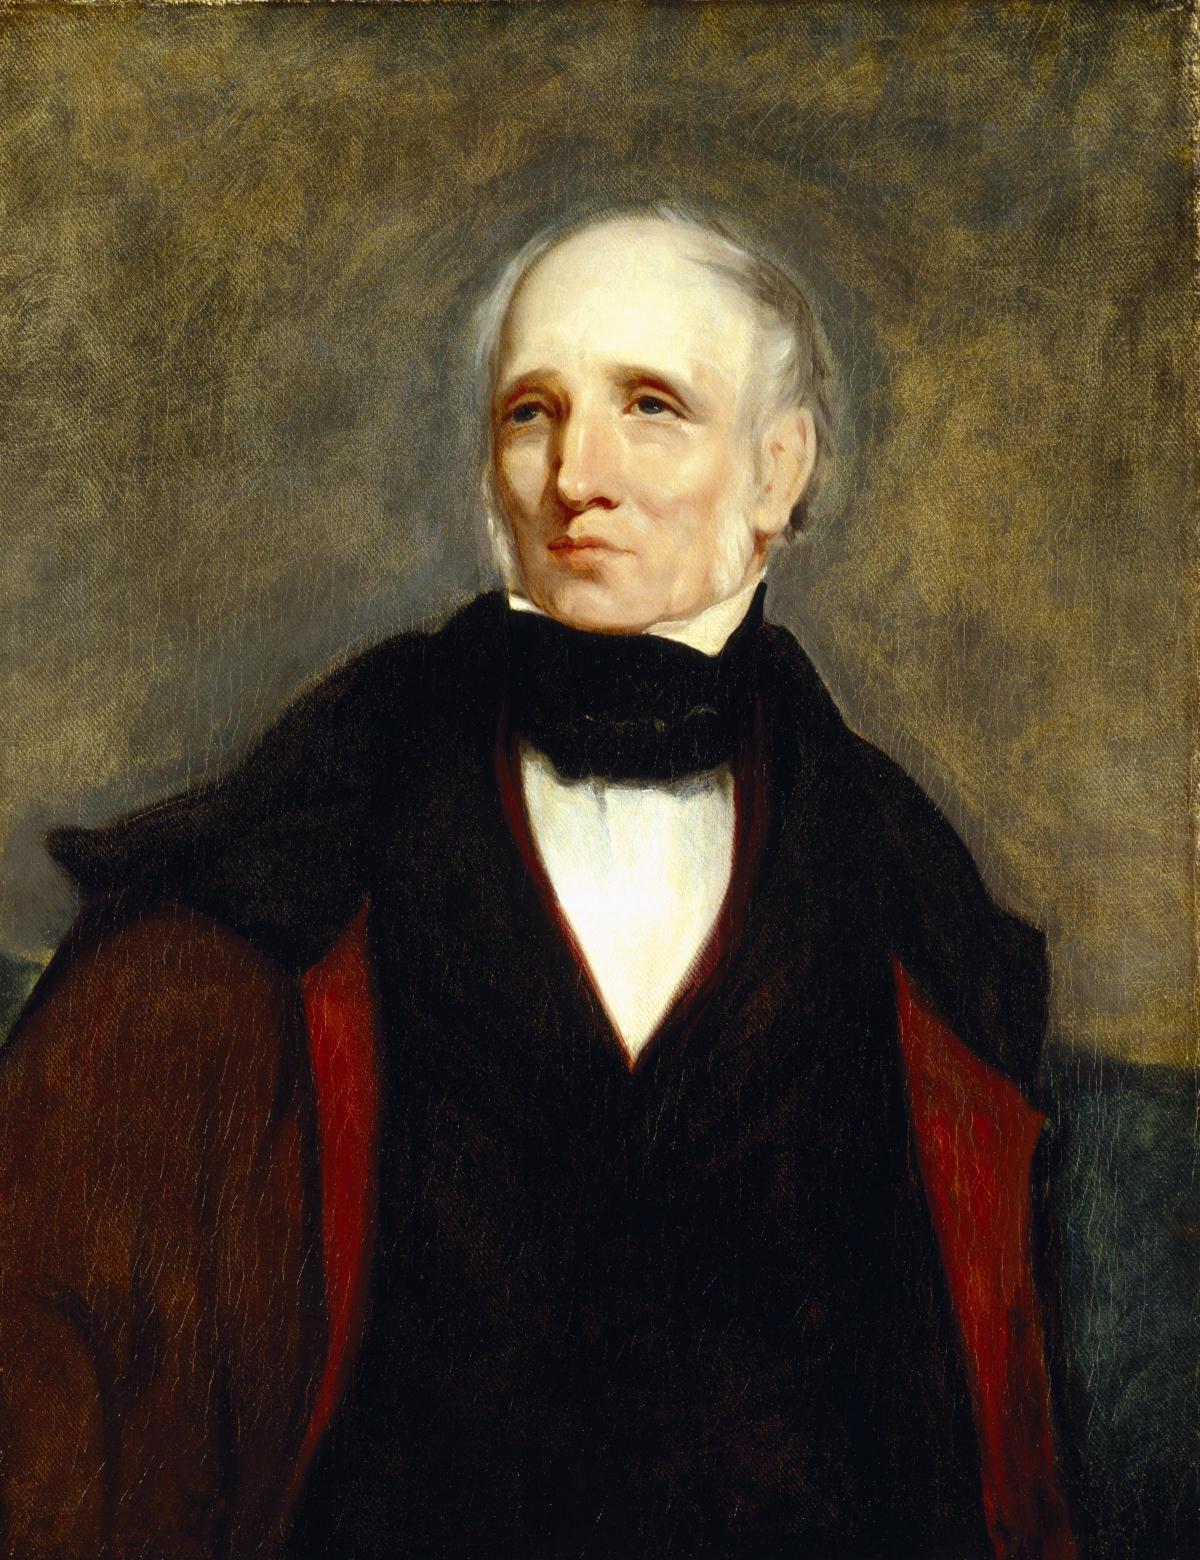 William Wordsworth (1770-1850), who visited Sockburn in 1799 and walked the banks of the Tees